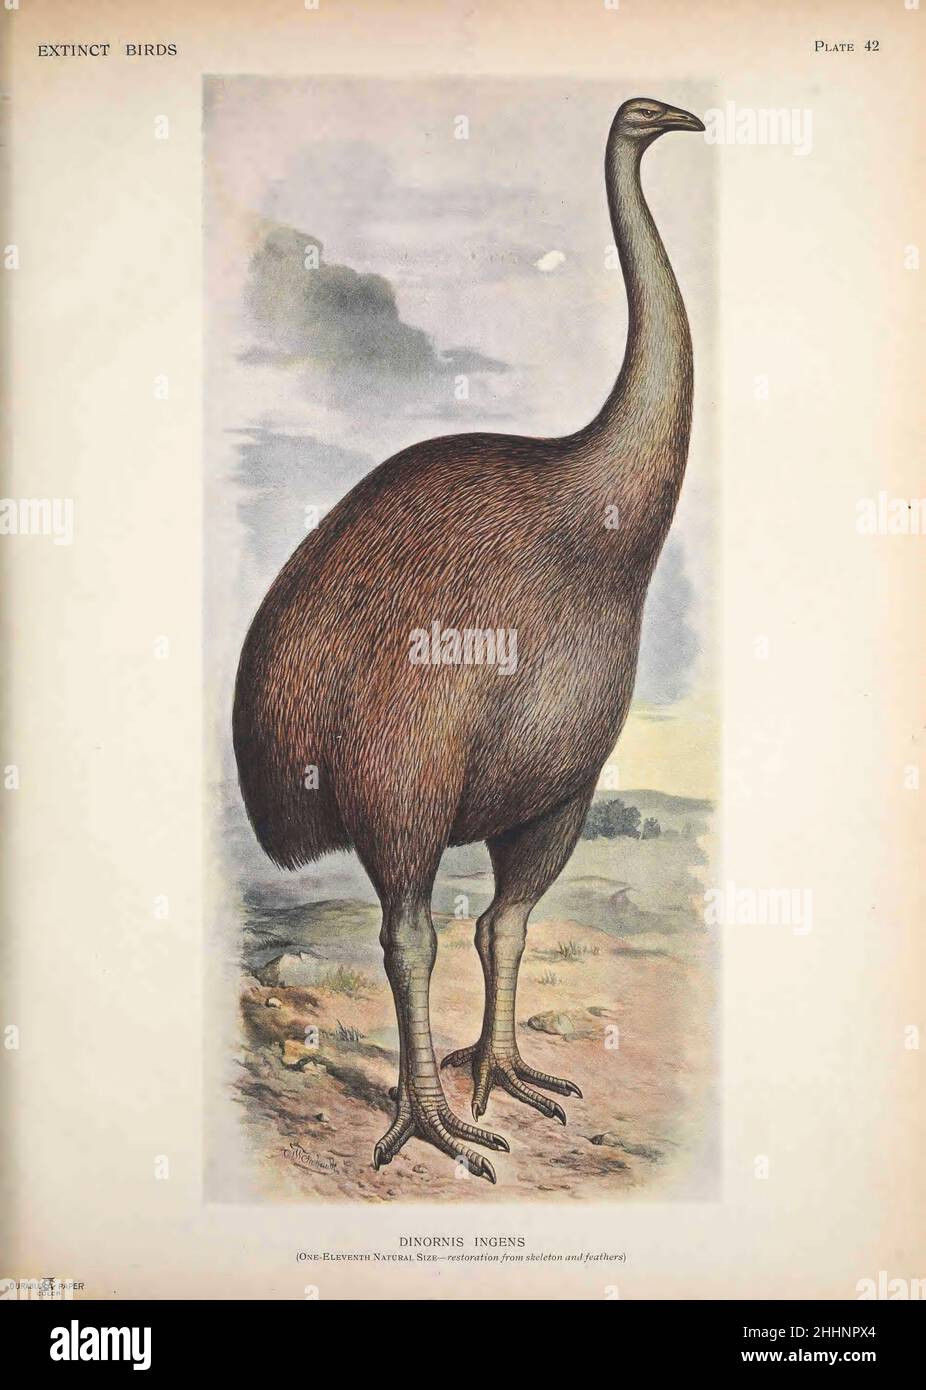 Giant Moa (Dinornis Ingens) is an extinct genus of birds belonging to the moa family. As with other moa, it was a member of the order Dinornithiformes. It was endemic to New Zealand. Two species of Dinornis are considered valid from ' Extinct birds ' : an attempt to unite in one volume a short account of those birds which have become extinct in historical times : that is, within the last six or seven hundred years : to which are added a few which still exist, but are on the verge of extinction. by Baron, Lionel Walter Rothschild, 1868-1937 Published 1907 as a limited edition book in London by Stock Photo